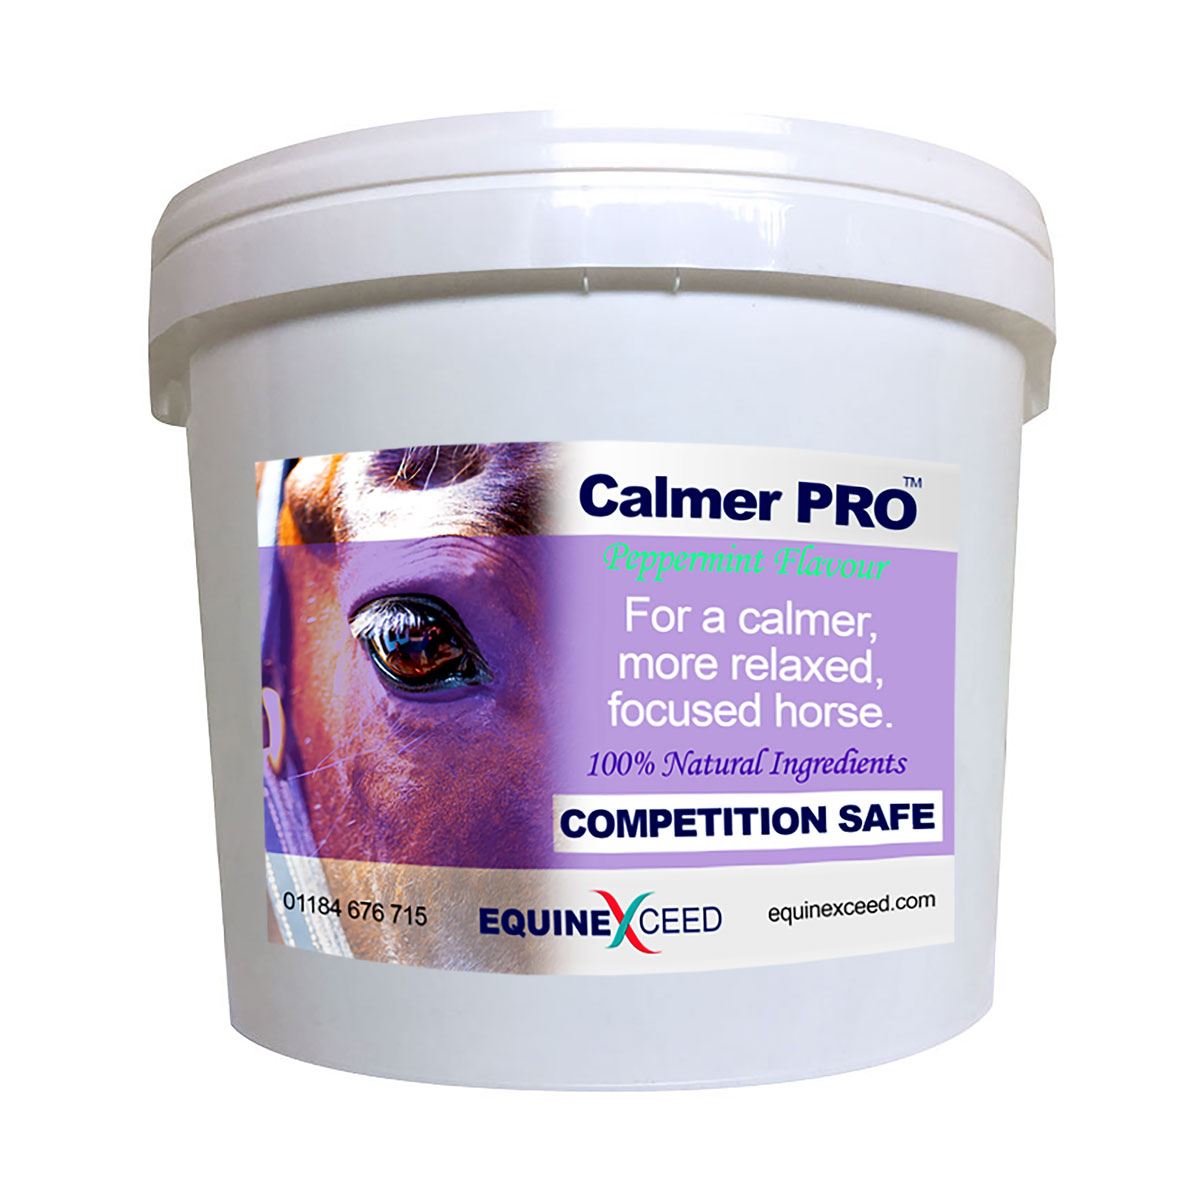 Equine Exceed Calmer PRO - Just Horse Riders